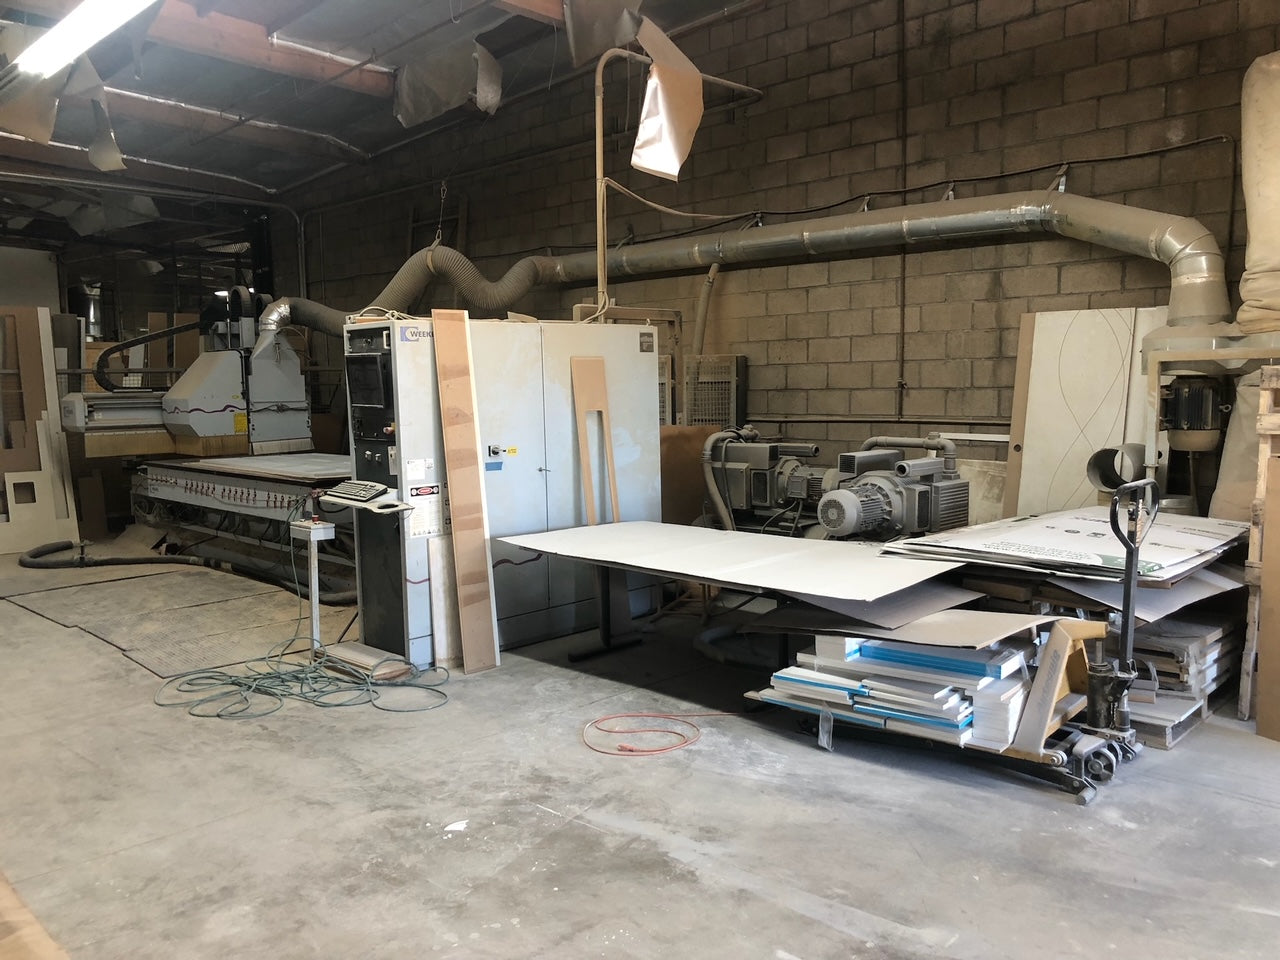 2002 Weeke OPTIMAT BHC 550 FLAT TABLE CNC ROUTER – New Listing More Details Coming!